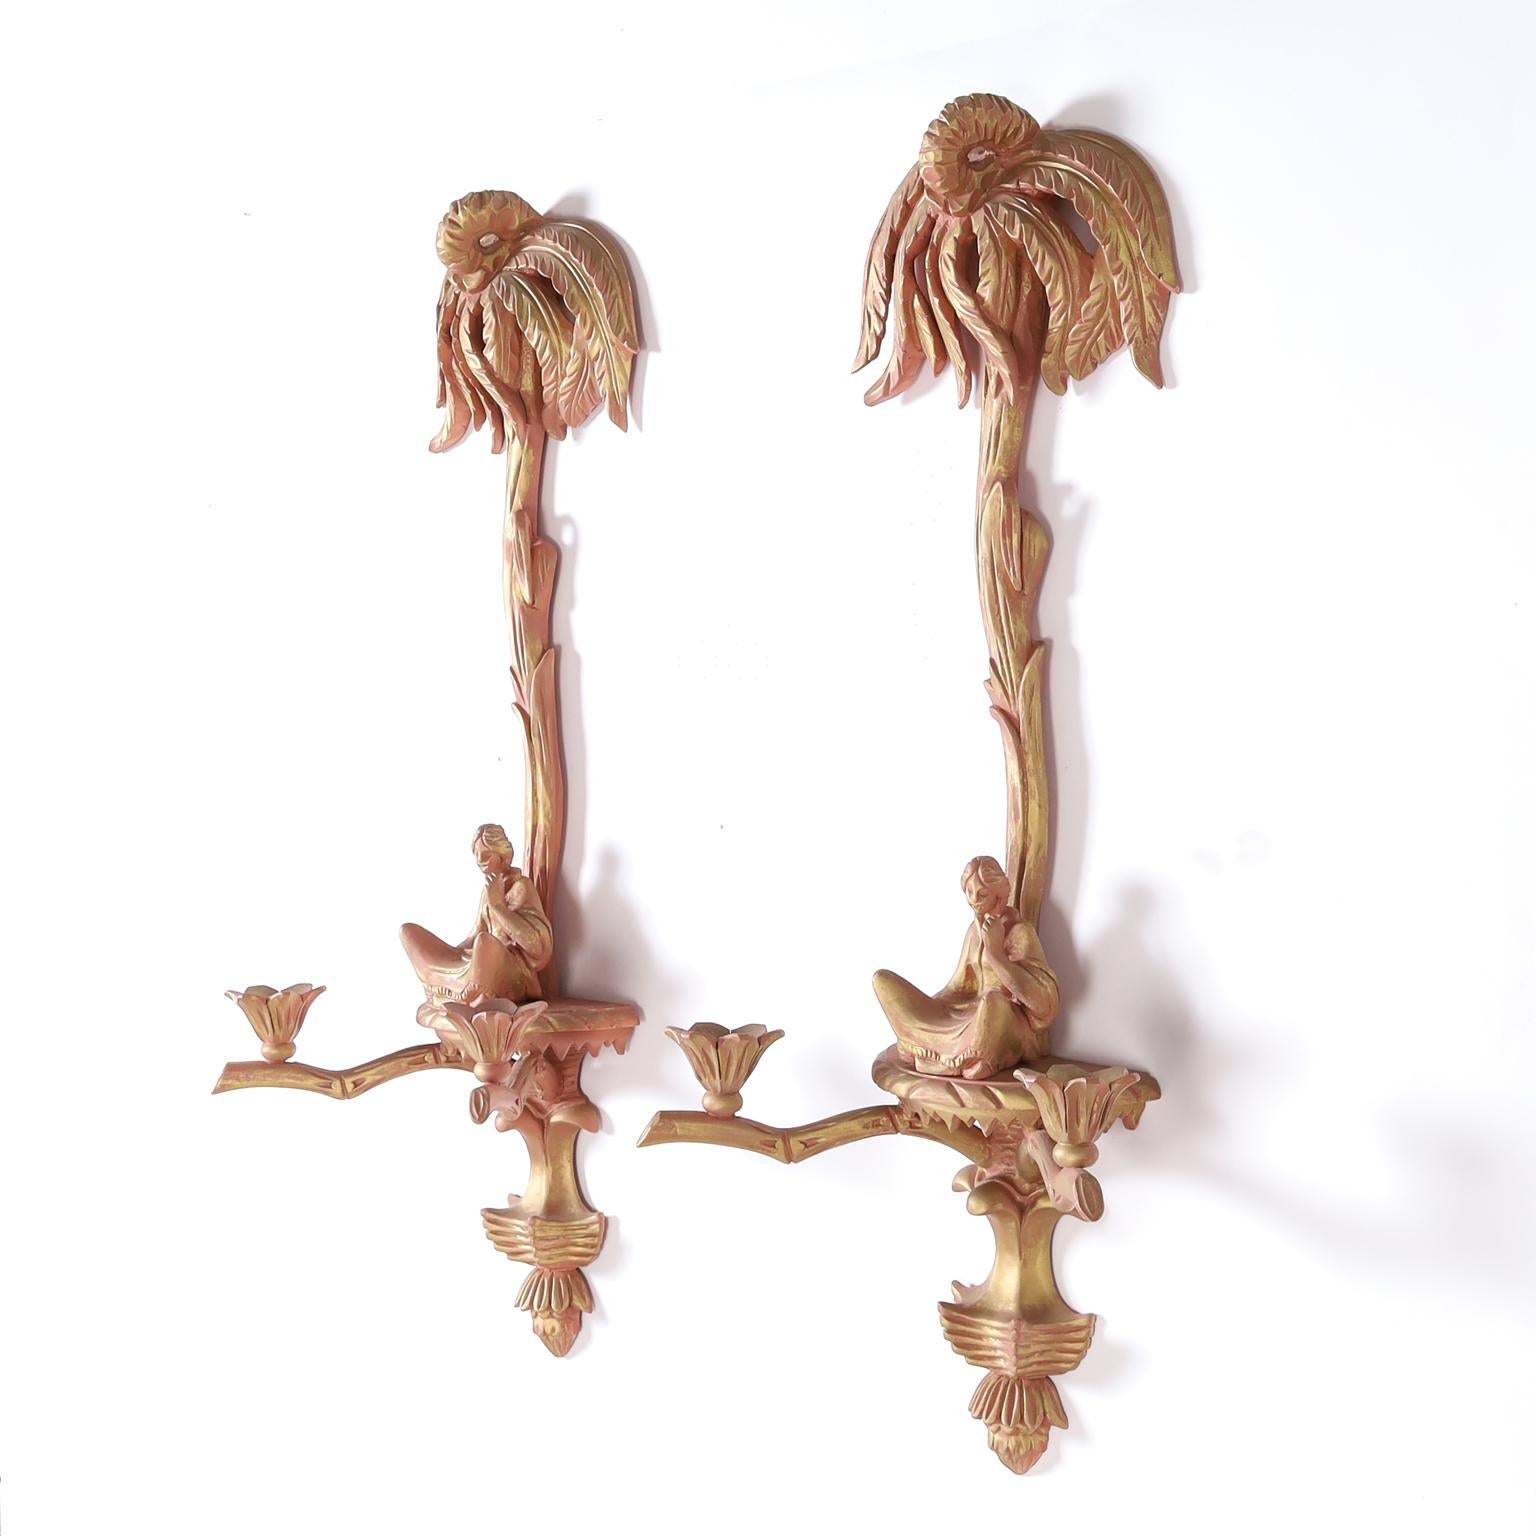 Pair of two light Italian carved wood wall sconces having palm trees over a platform with a seated chinoiserie figure, faux bamboo arms supporting floral candle cups, and a red and gold finish.